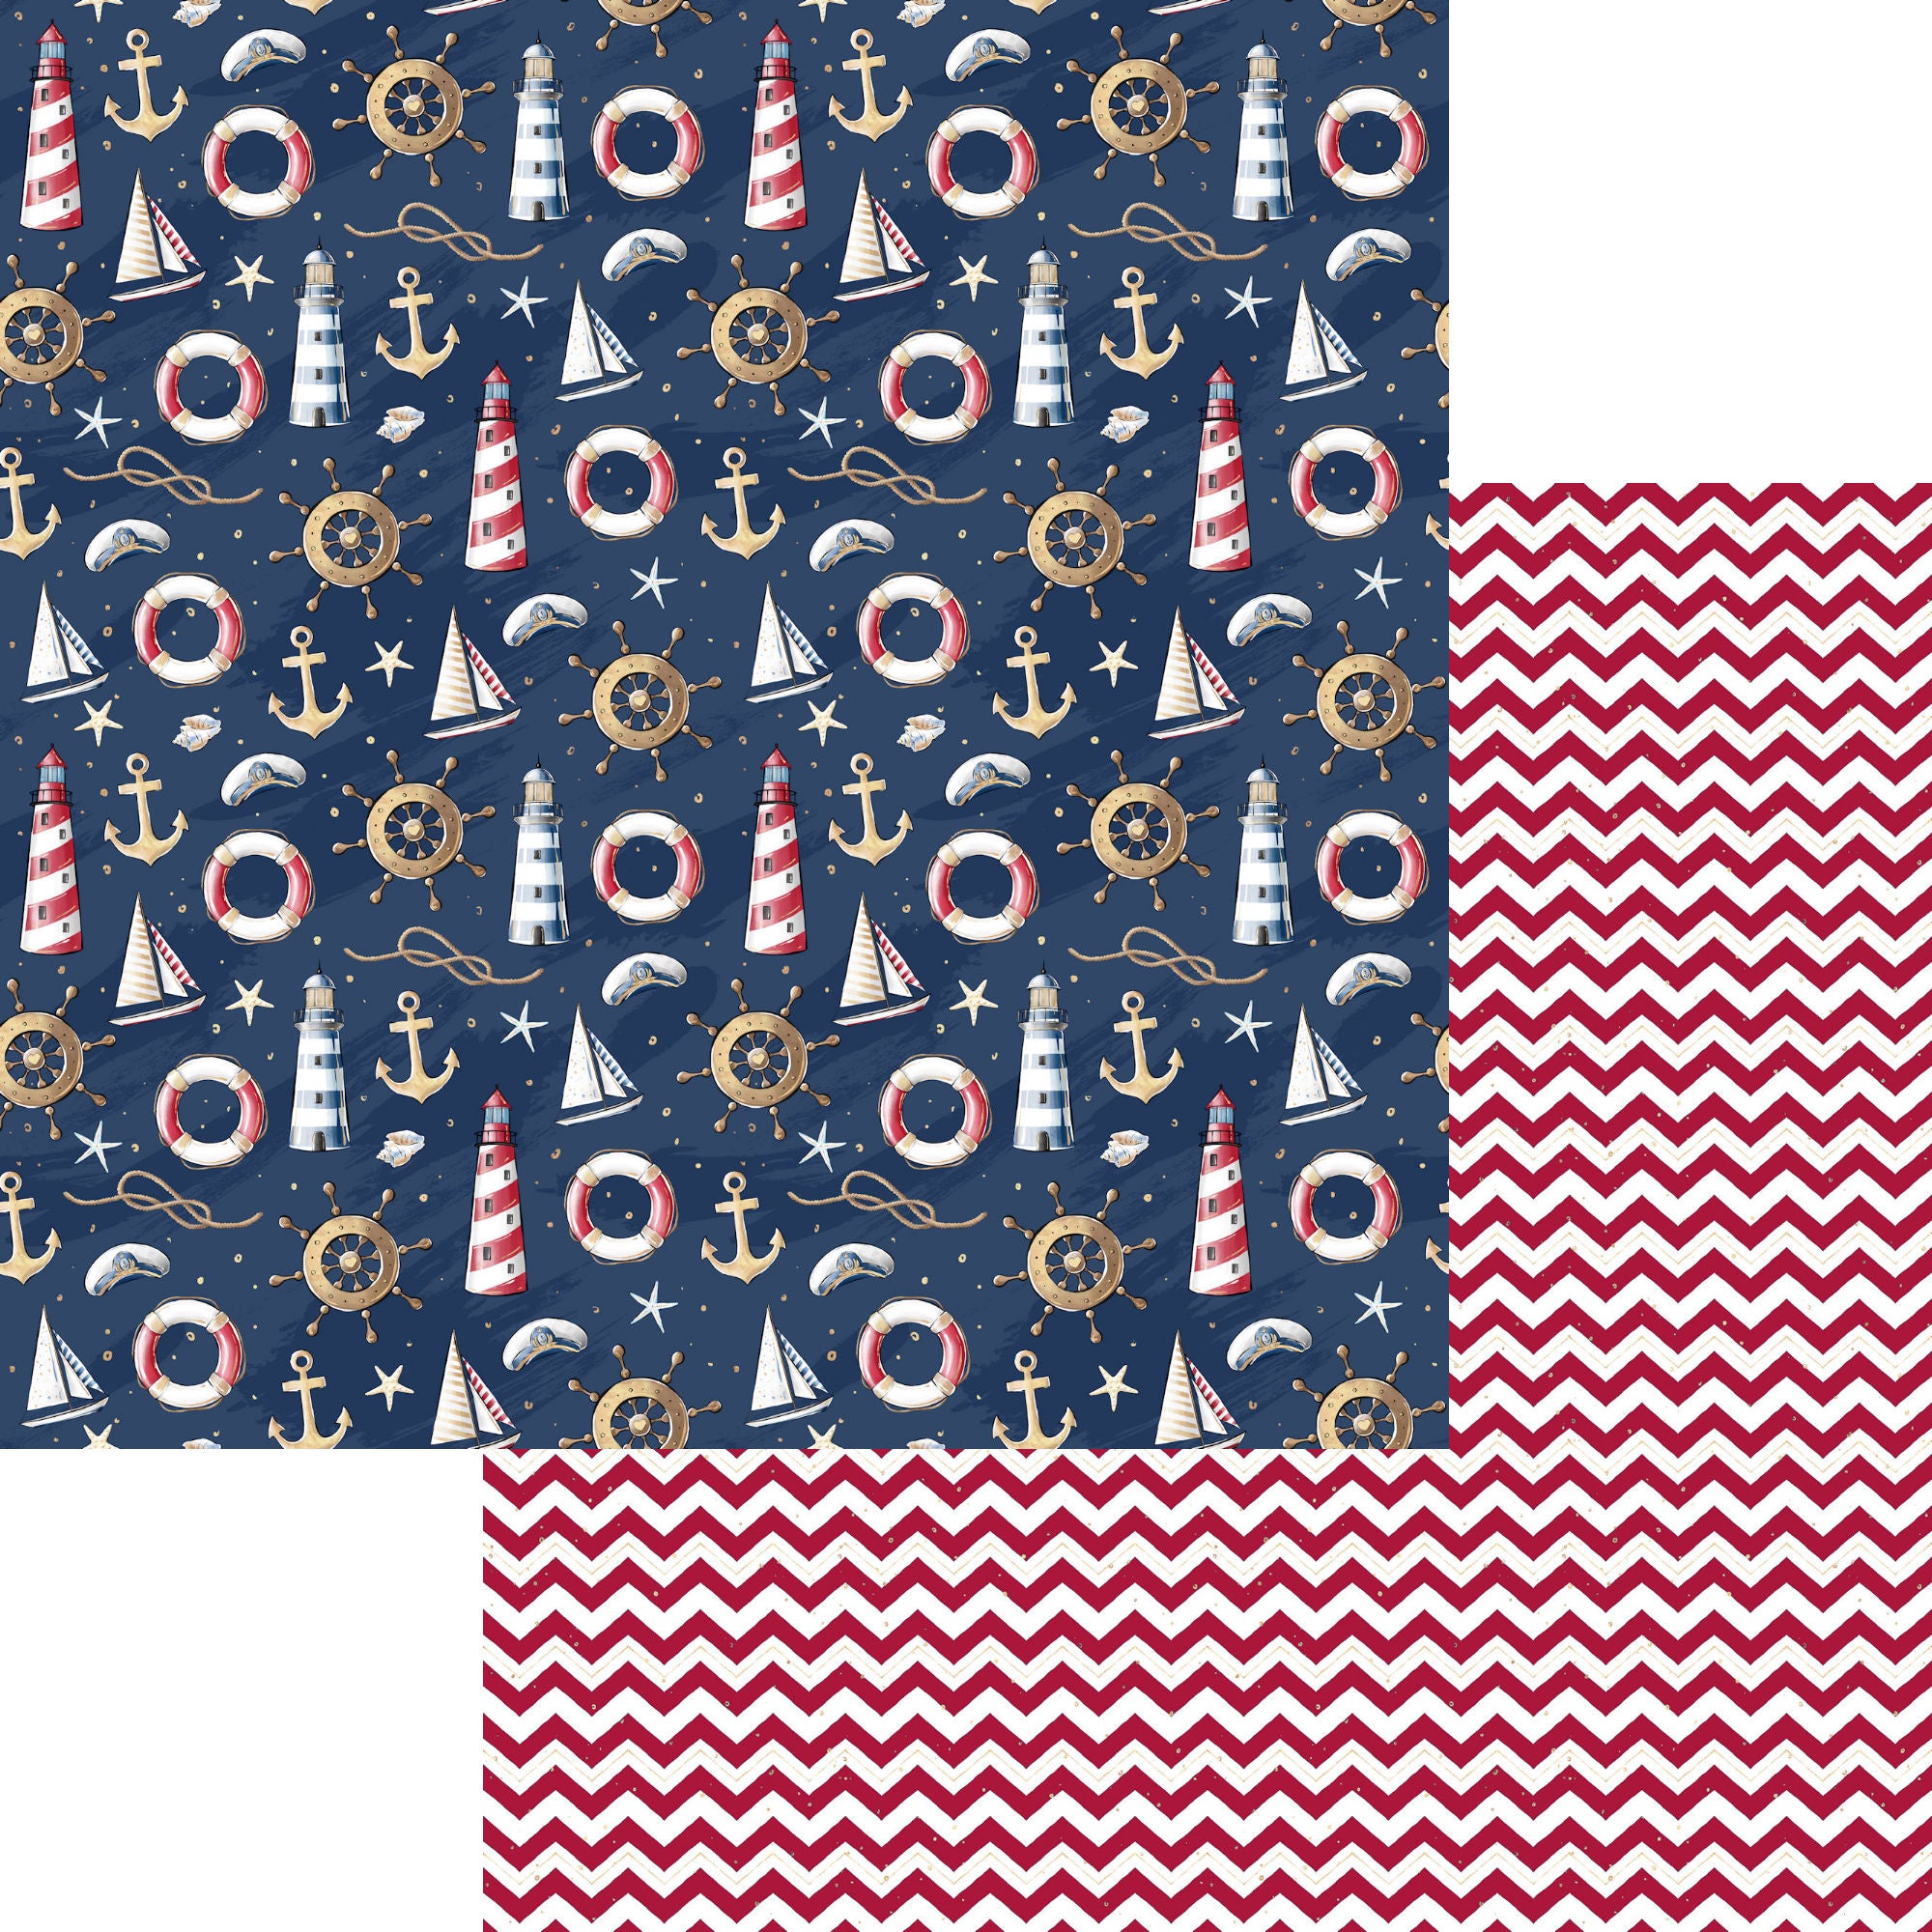 Nautical Summer Collection Oceanside Collage 12 x 12 Double-Sided Scrapbook Paper by SSC Designs